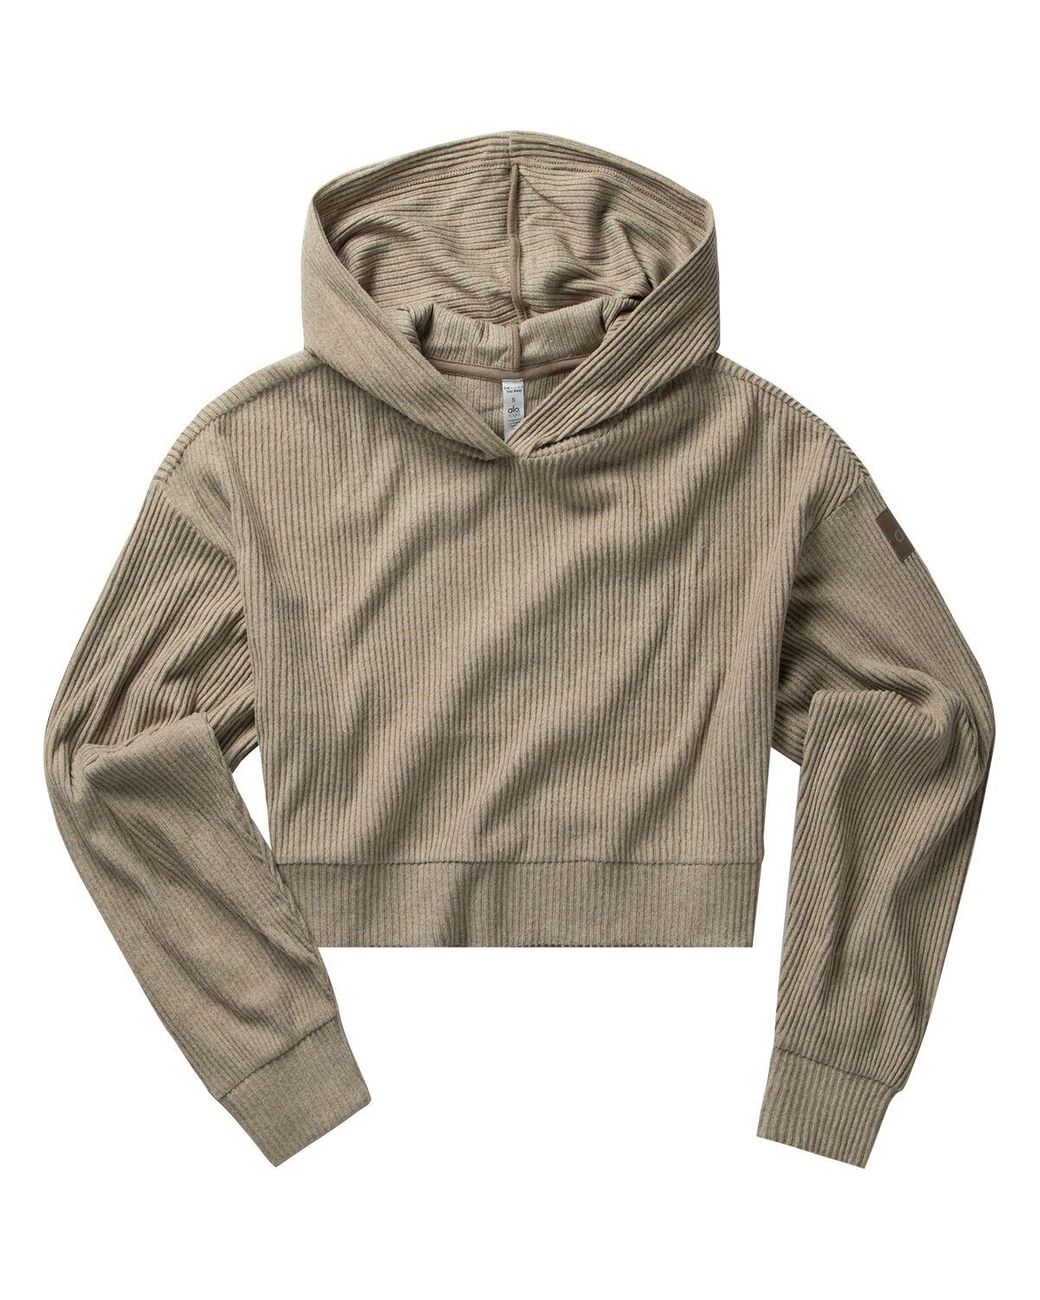 Alo Yoga Muse Hoodie in Gray